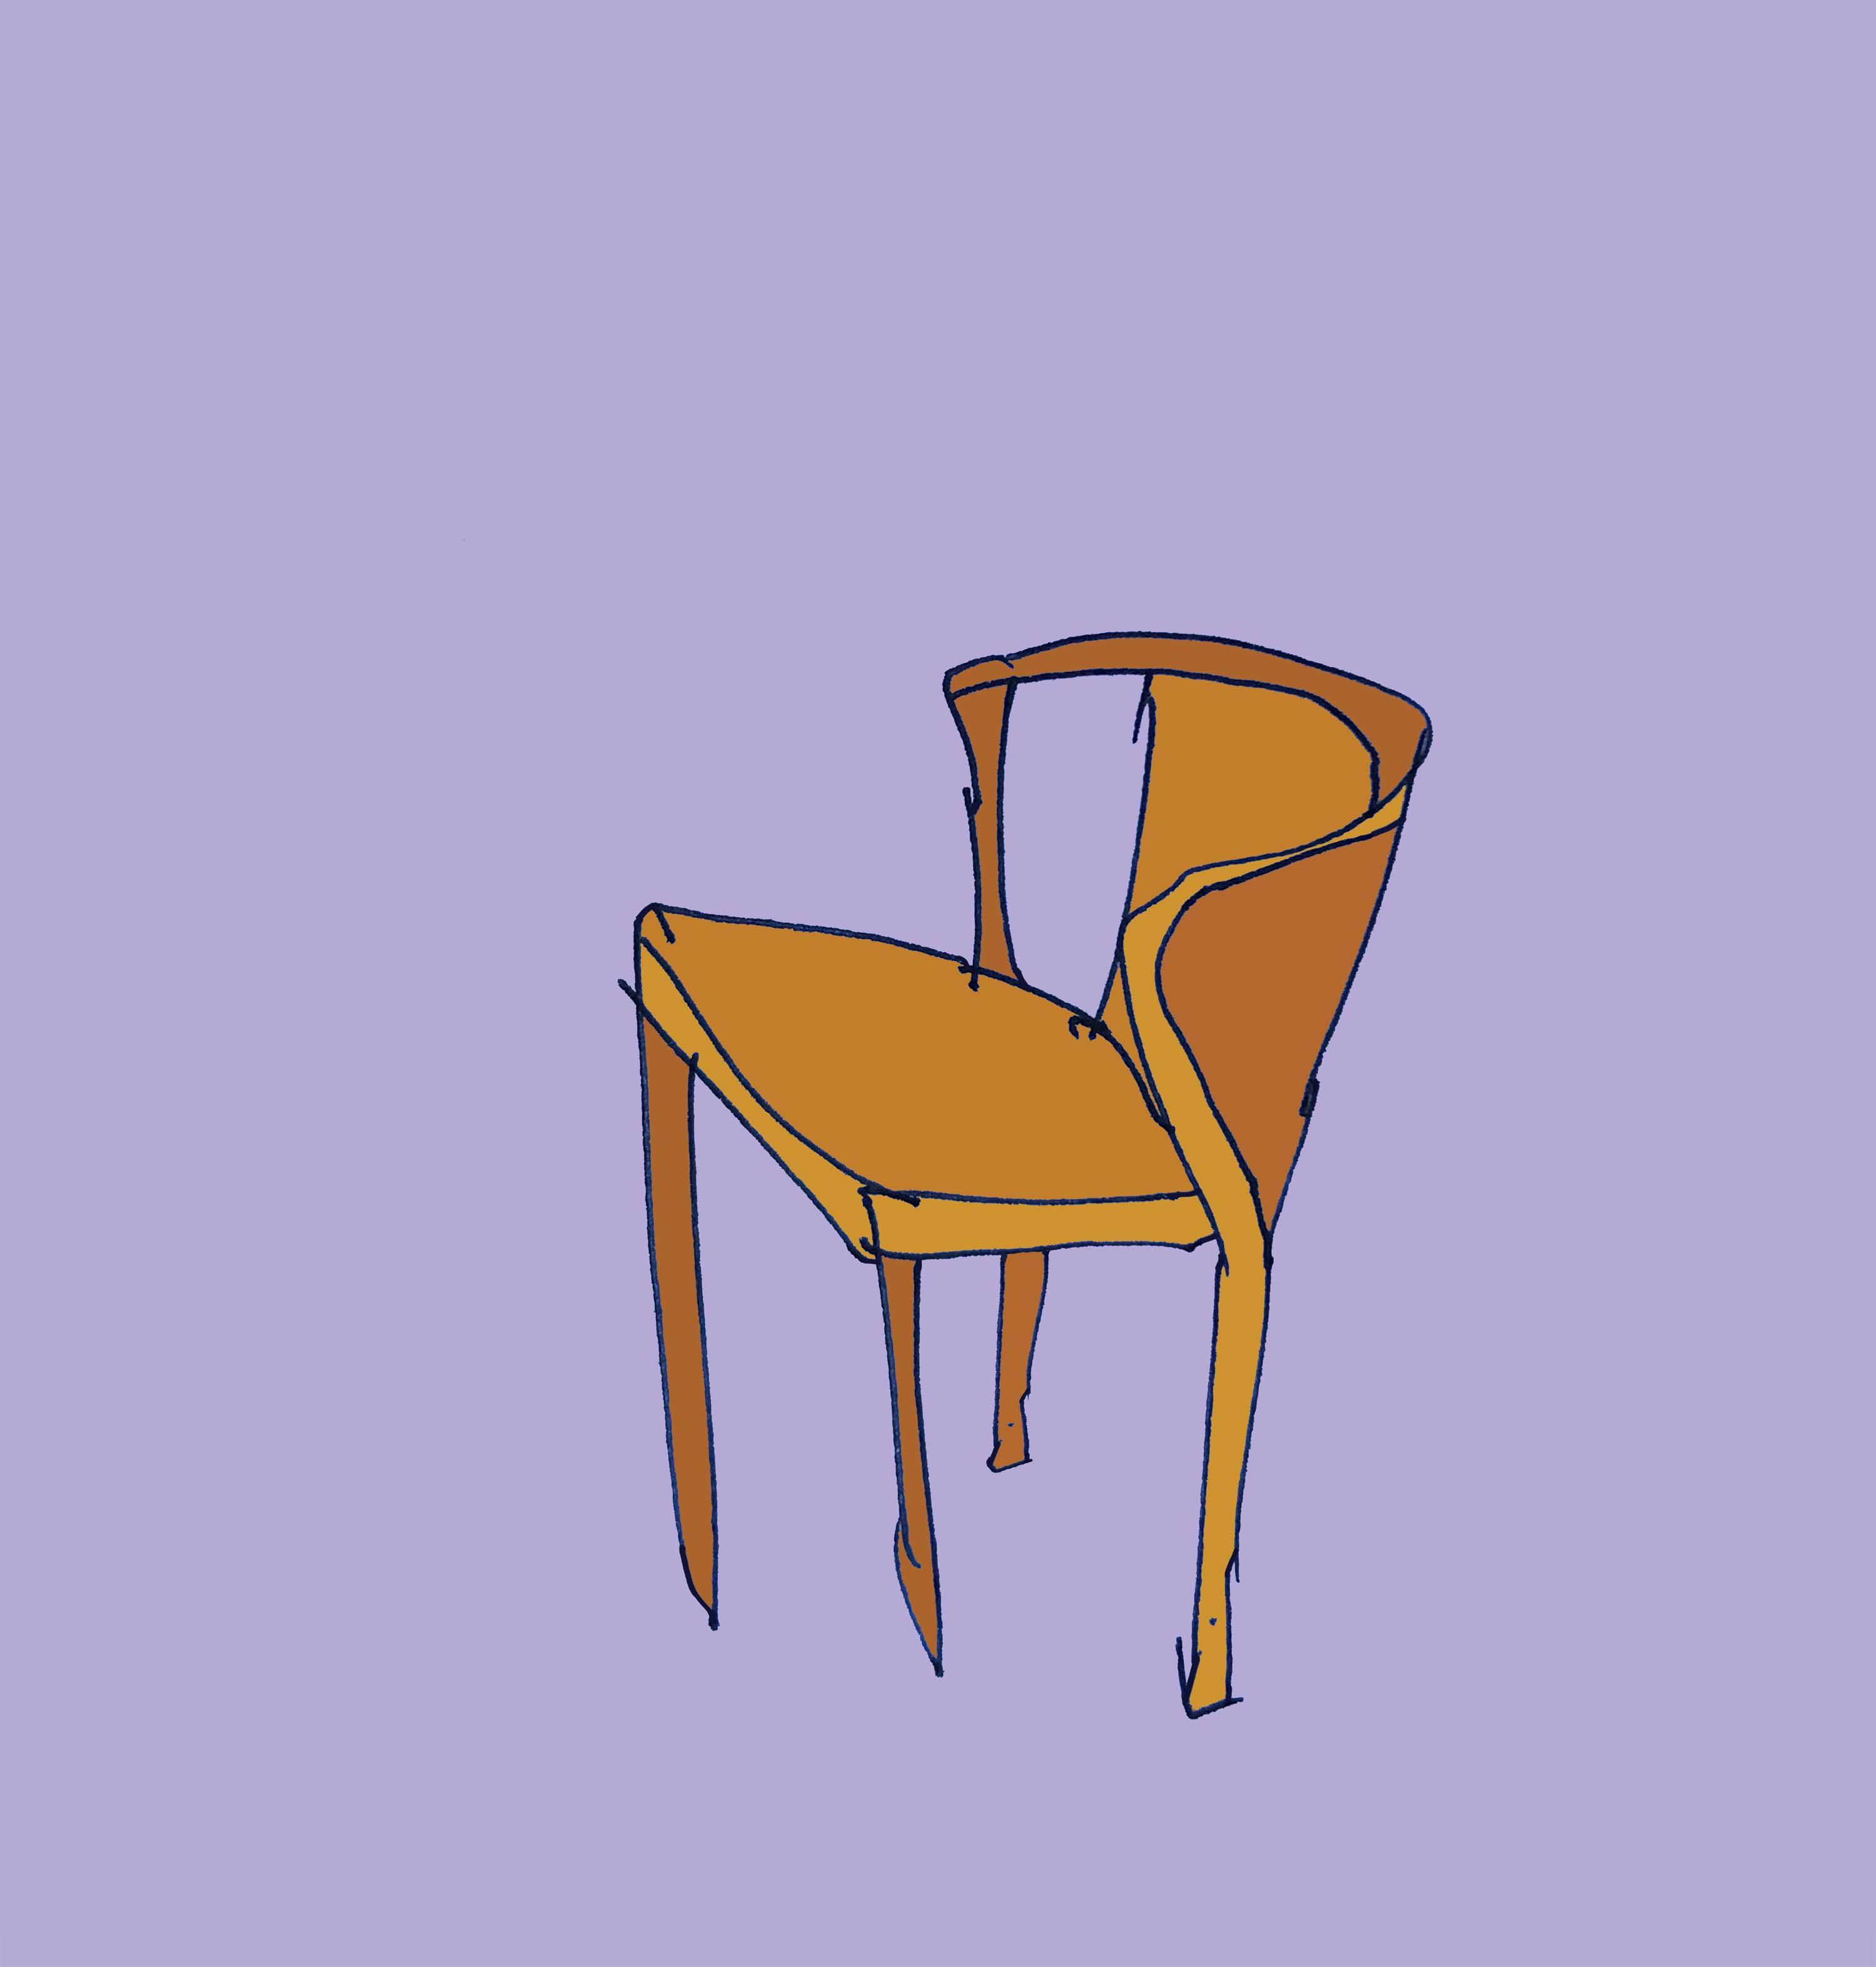 art every day number 296 / illustration / the bent wood chair